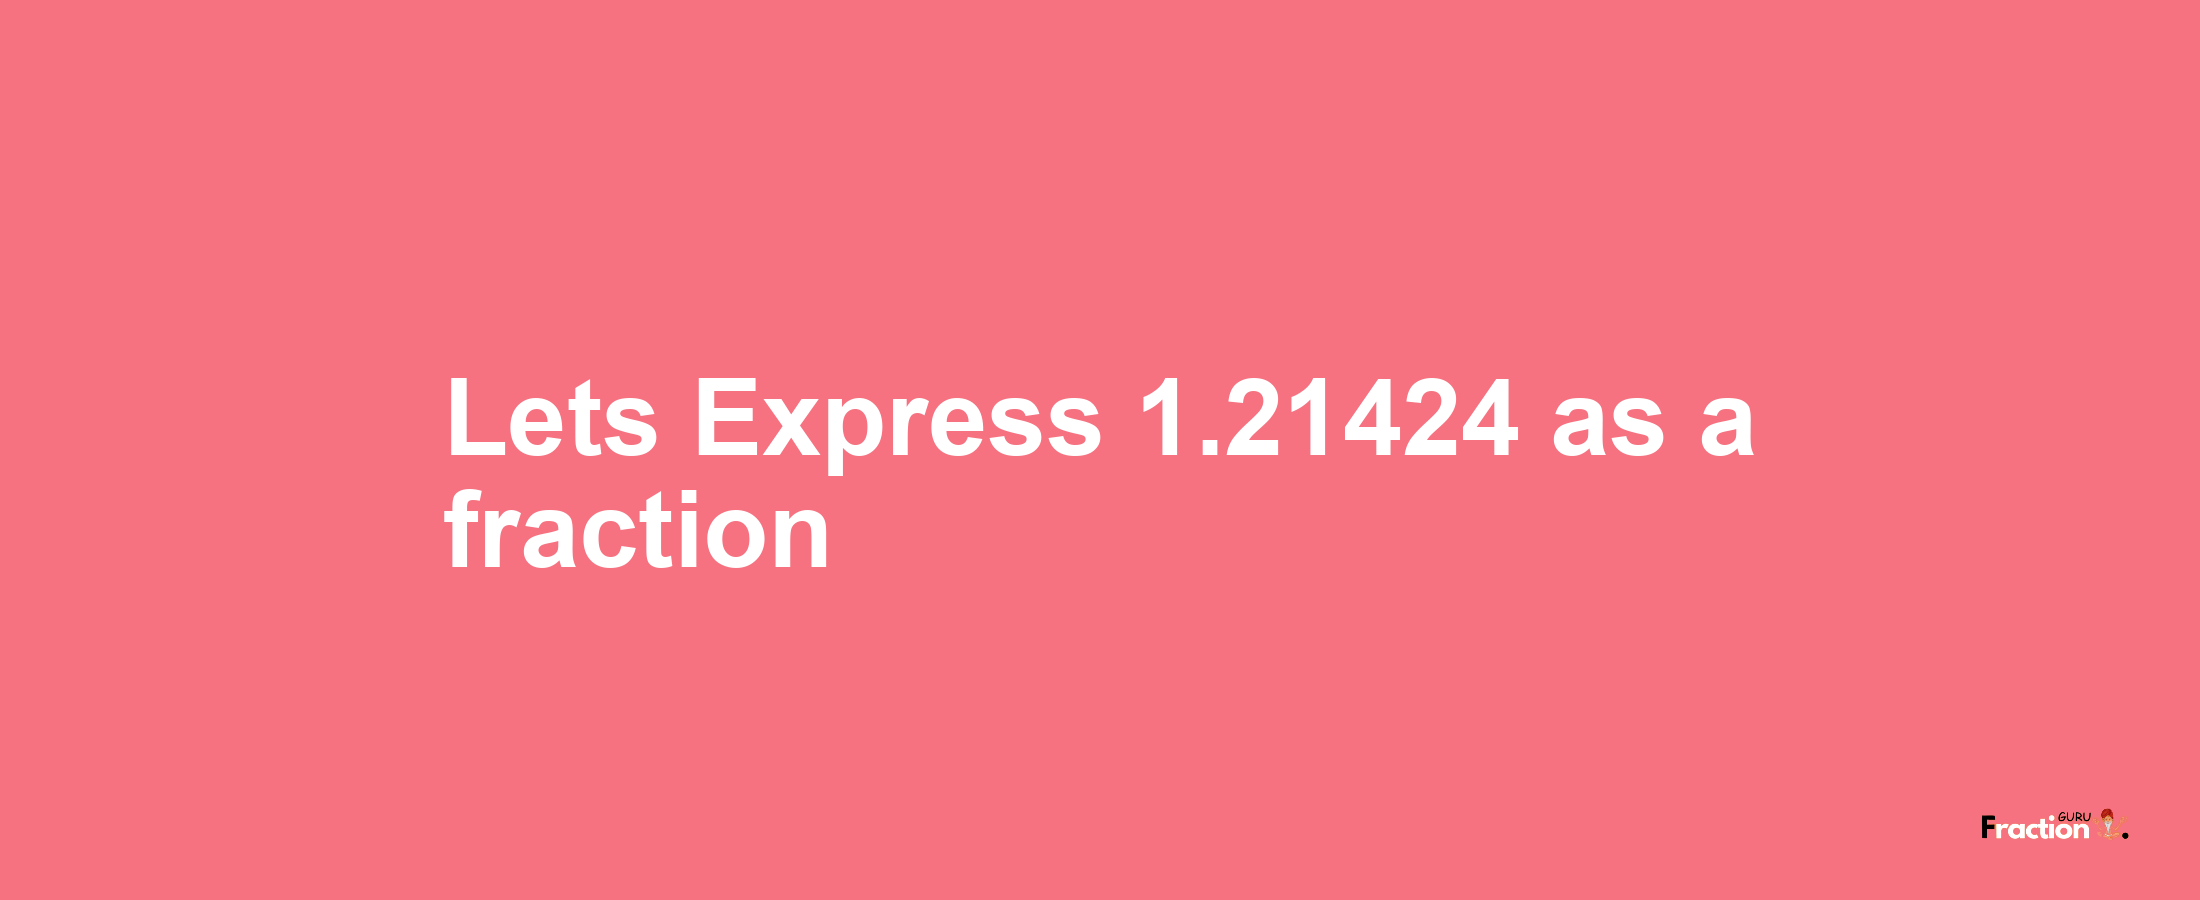 Lets Express 1.21424 as afraction